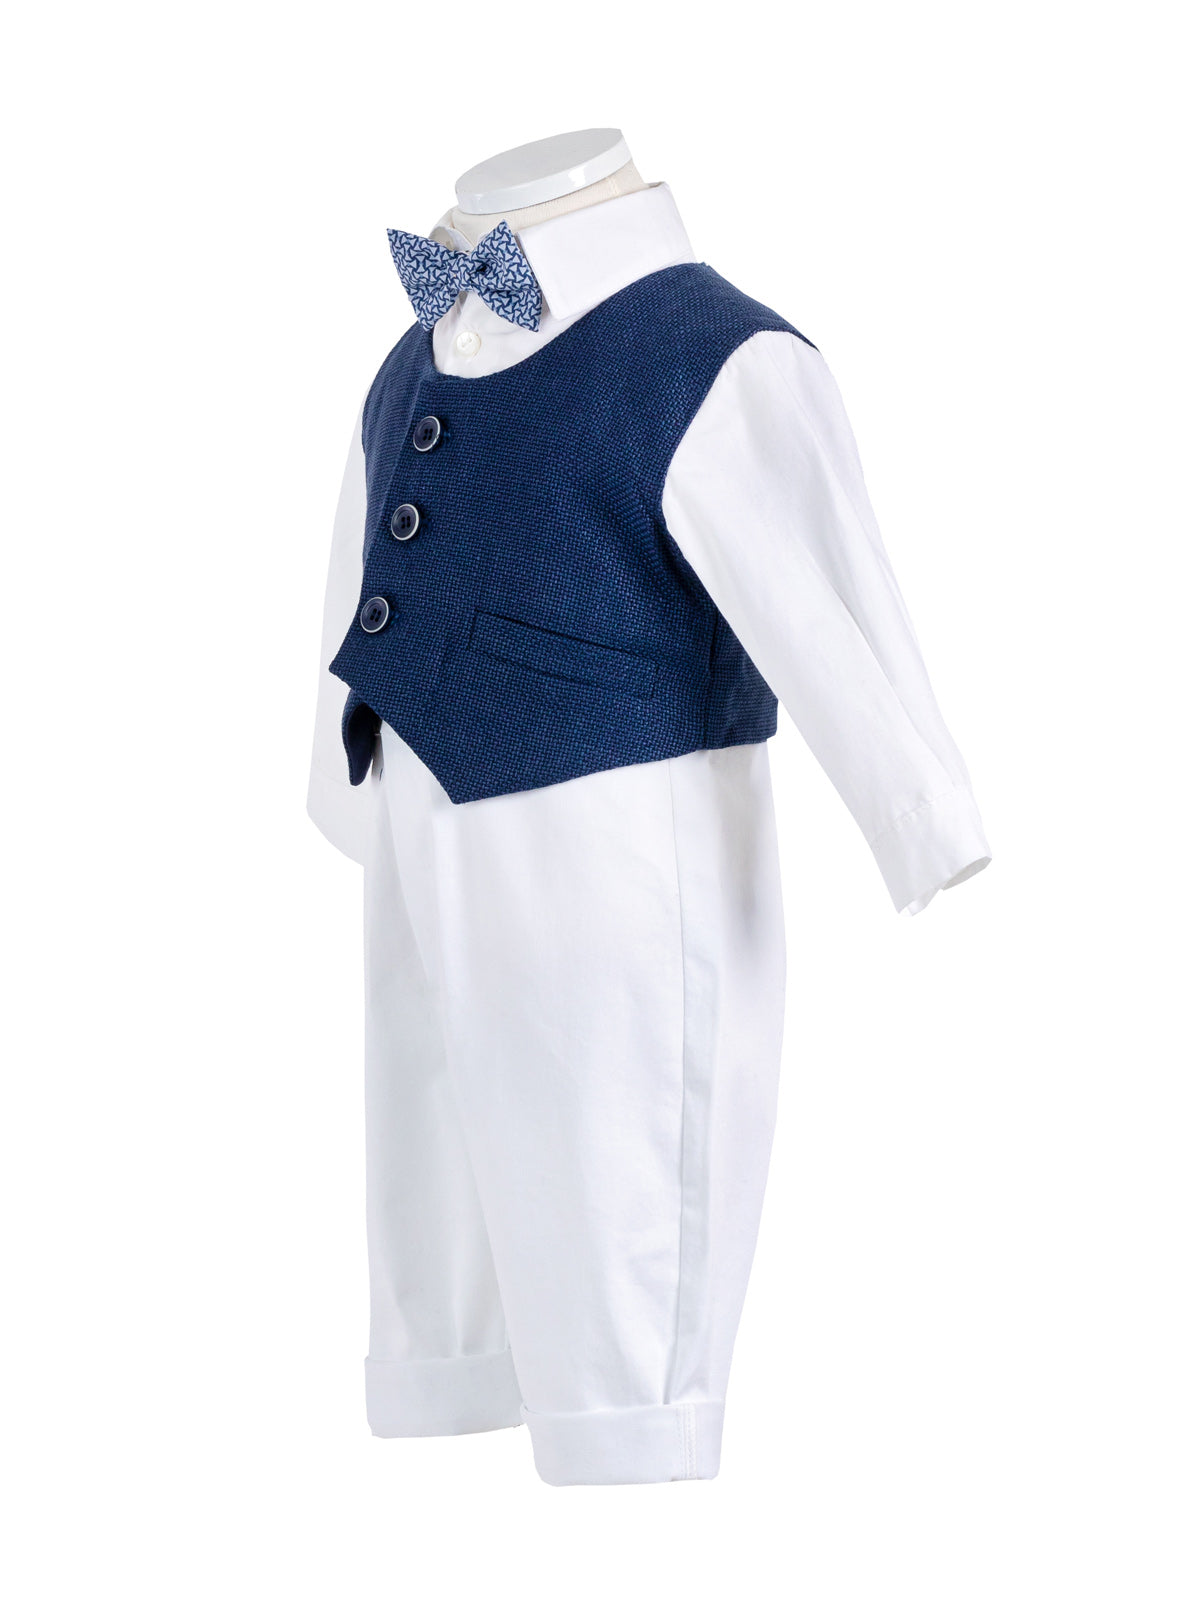 Baby playsuit for boy - TRISTAN